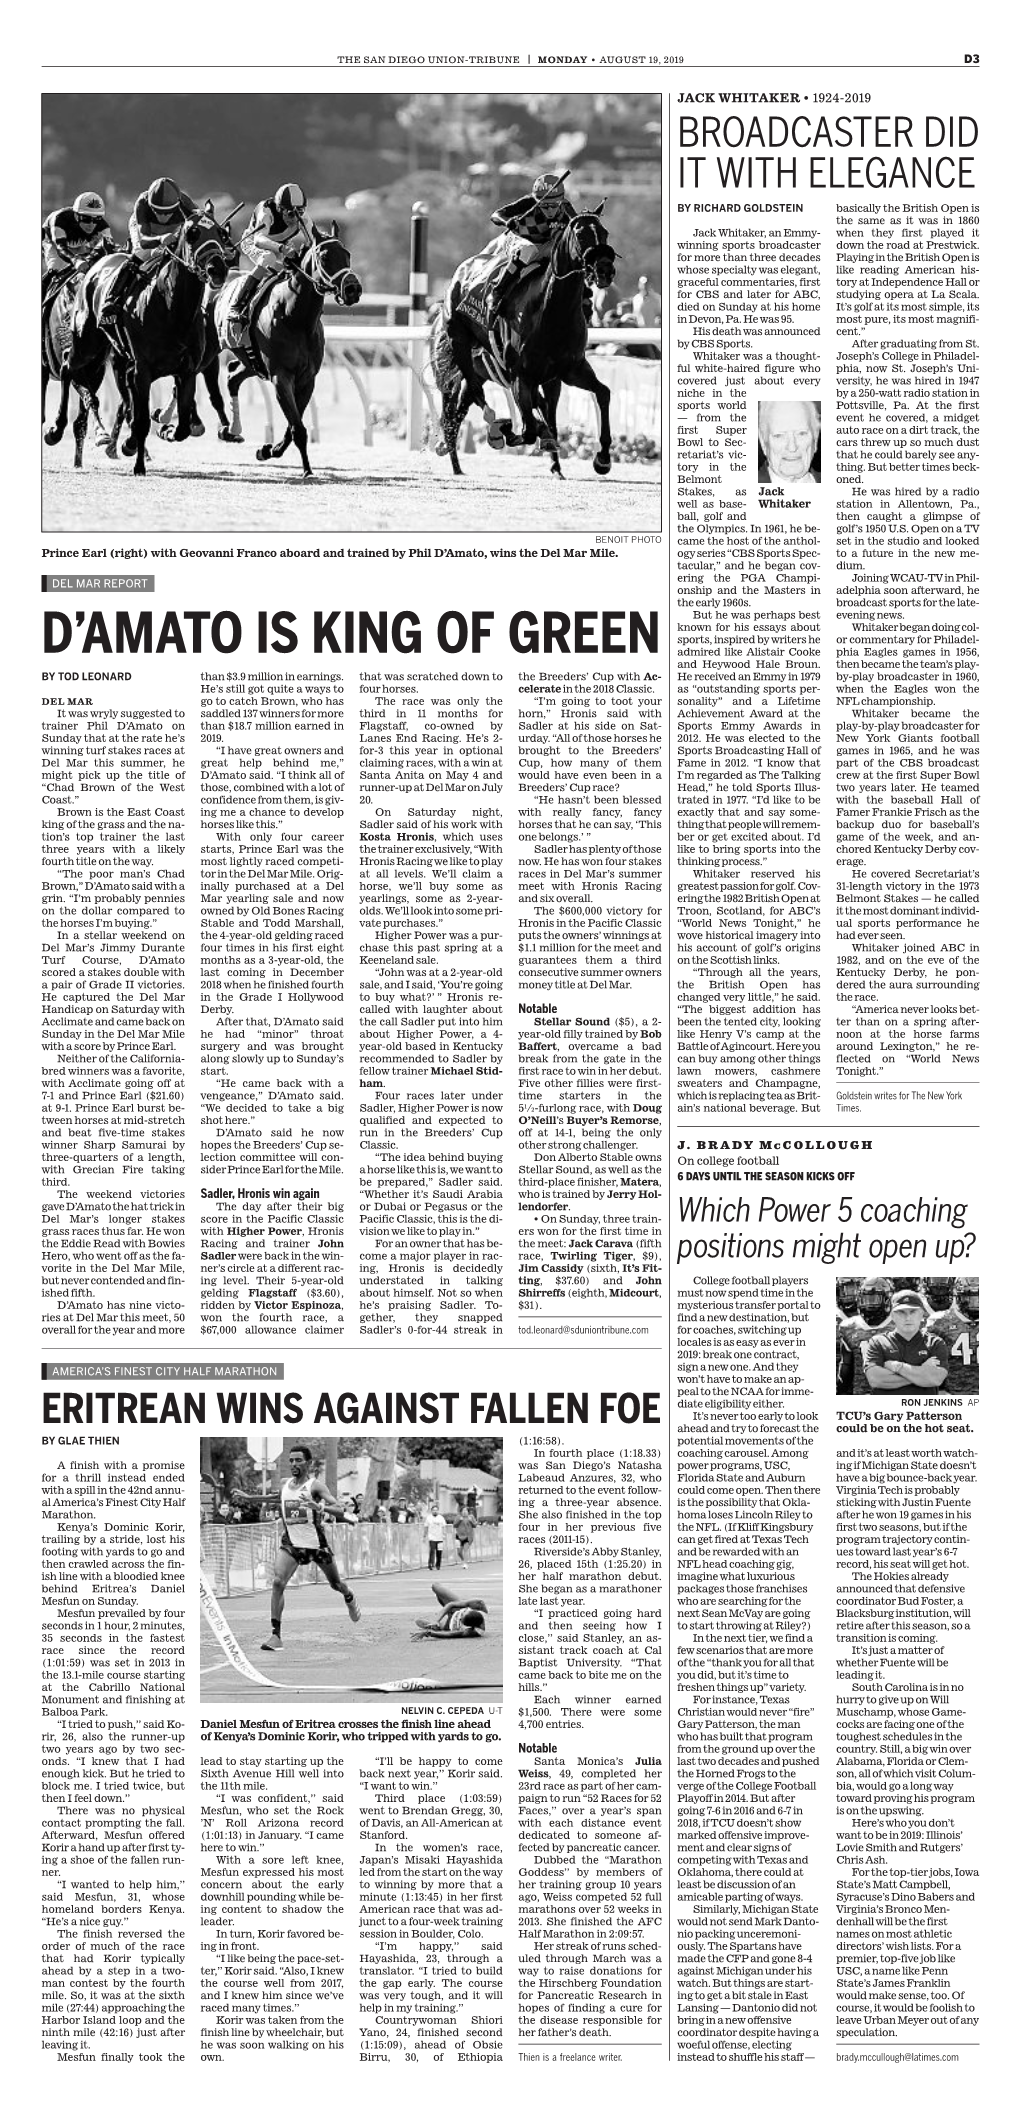 D'amato Is King of Green